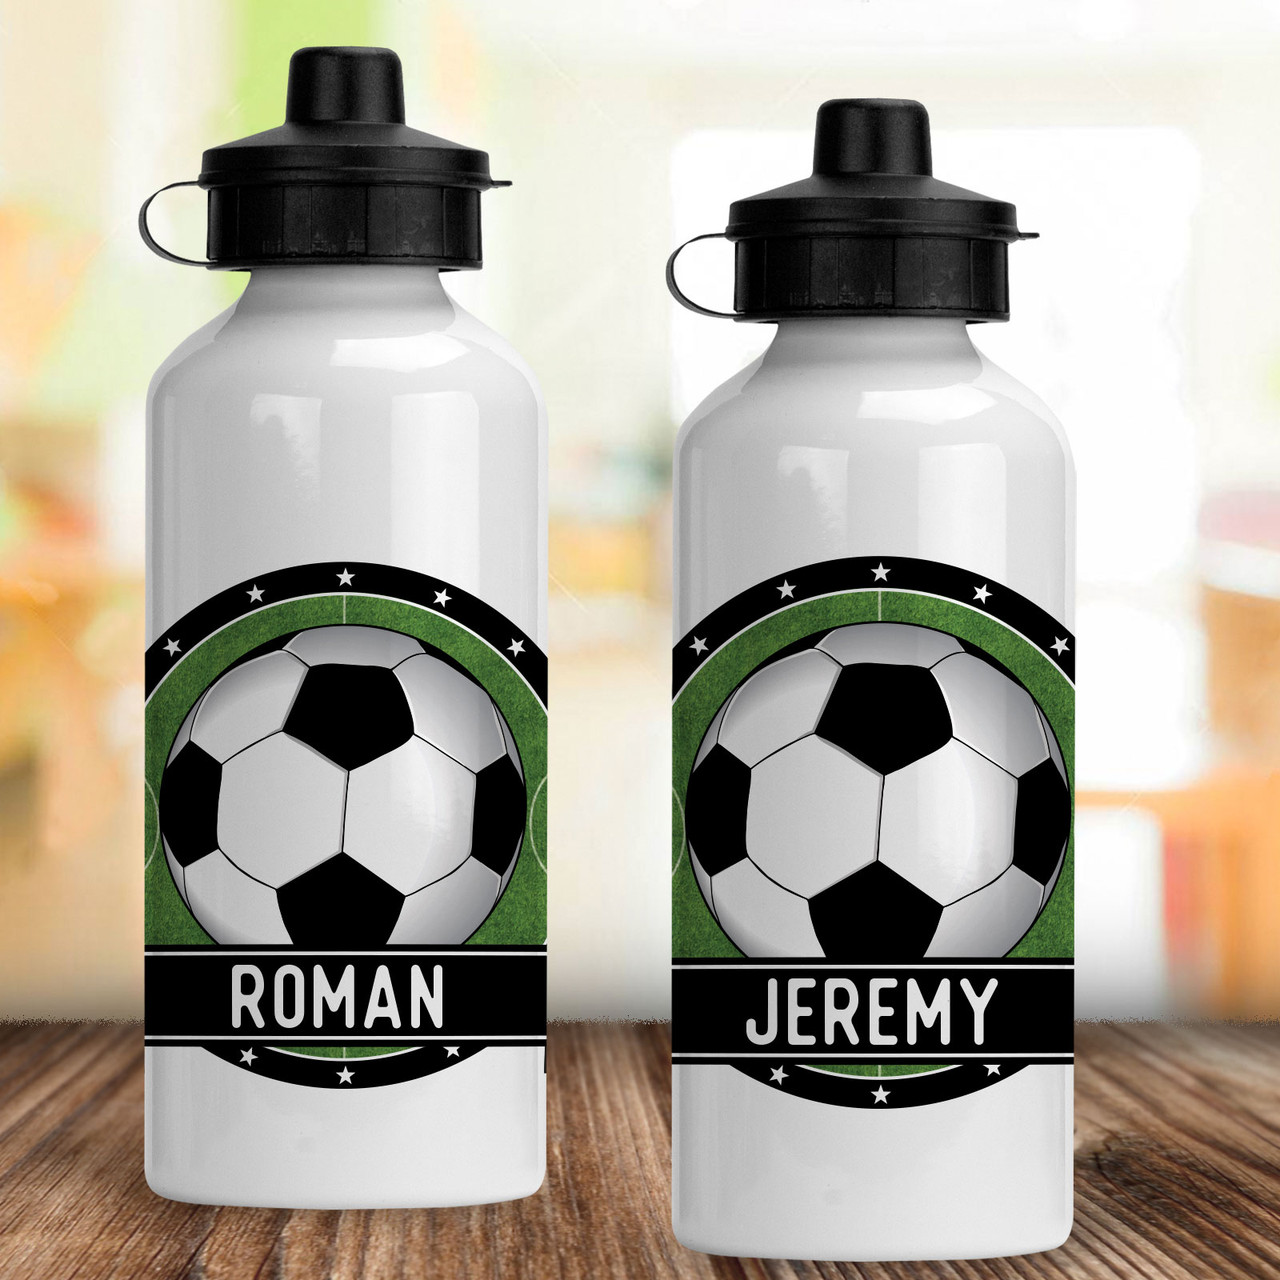 https://cdn11.bigcommerce.com/s-5grzuu6/images/stencil/1280x1280/products/293/30195/Soccer-Water-Bottle-Duo__32580.1591999400.jpg?c=2